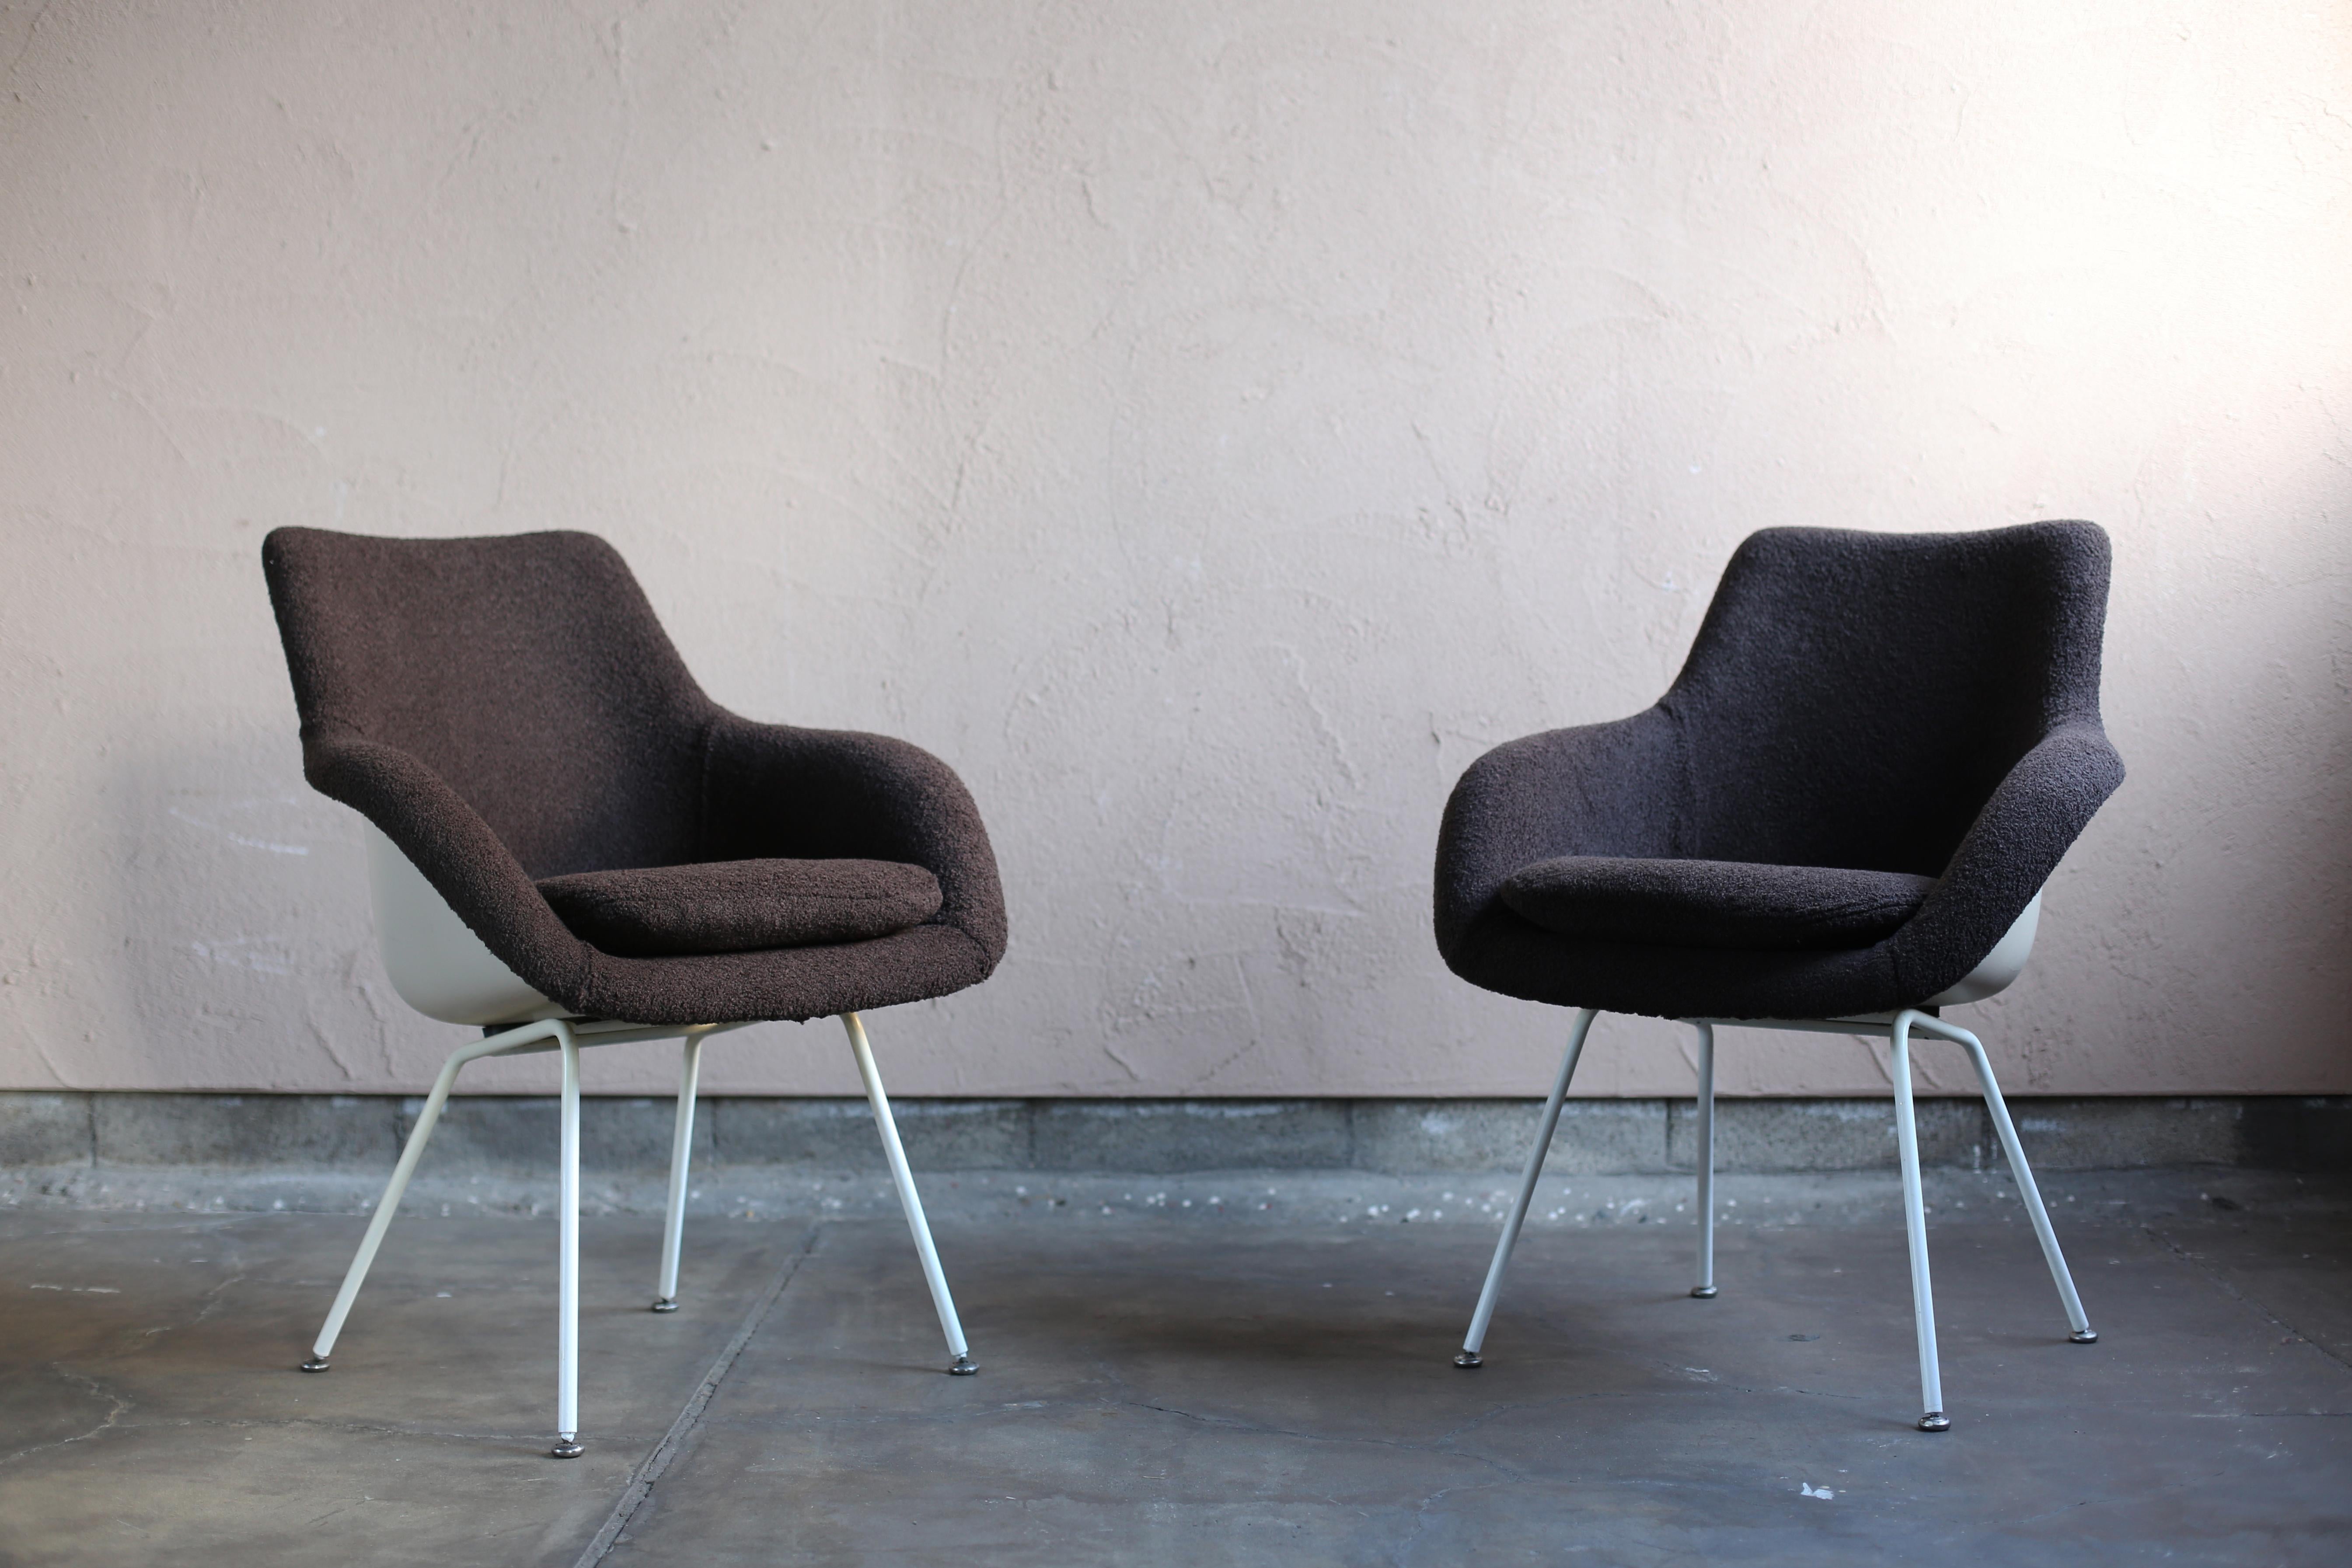 FRP manufacturing technology was introduced to Japan from America in 1954, as exemplified by the Charles & Ray Eames chairs of the 1950s.
By making it possible to create free three-dimensional curved surfaces that were impossible with conventional